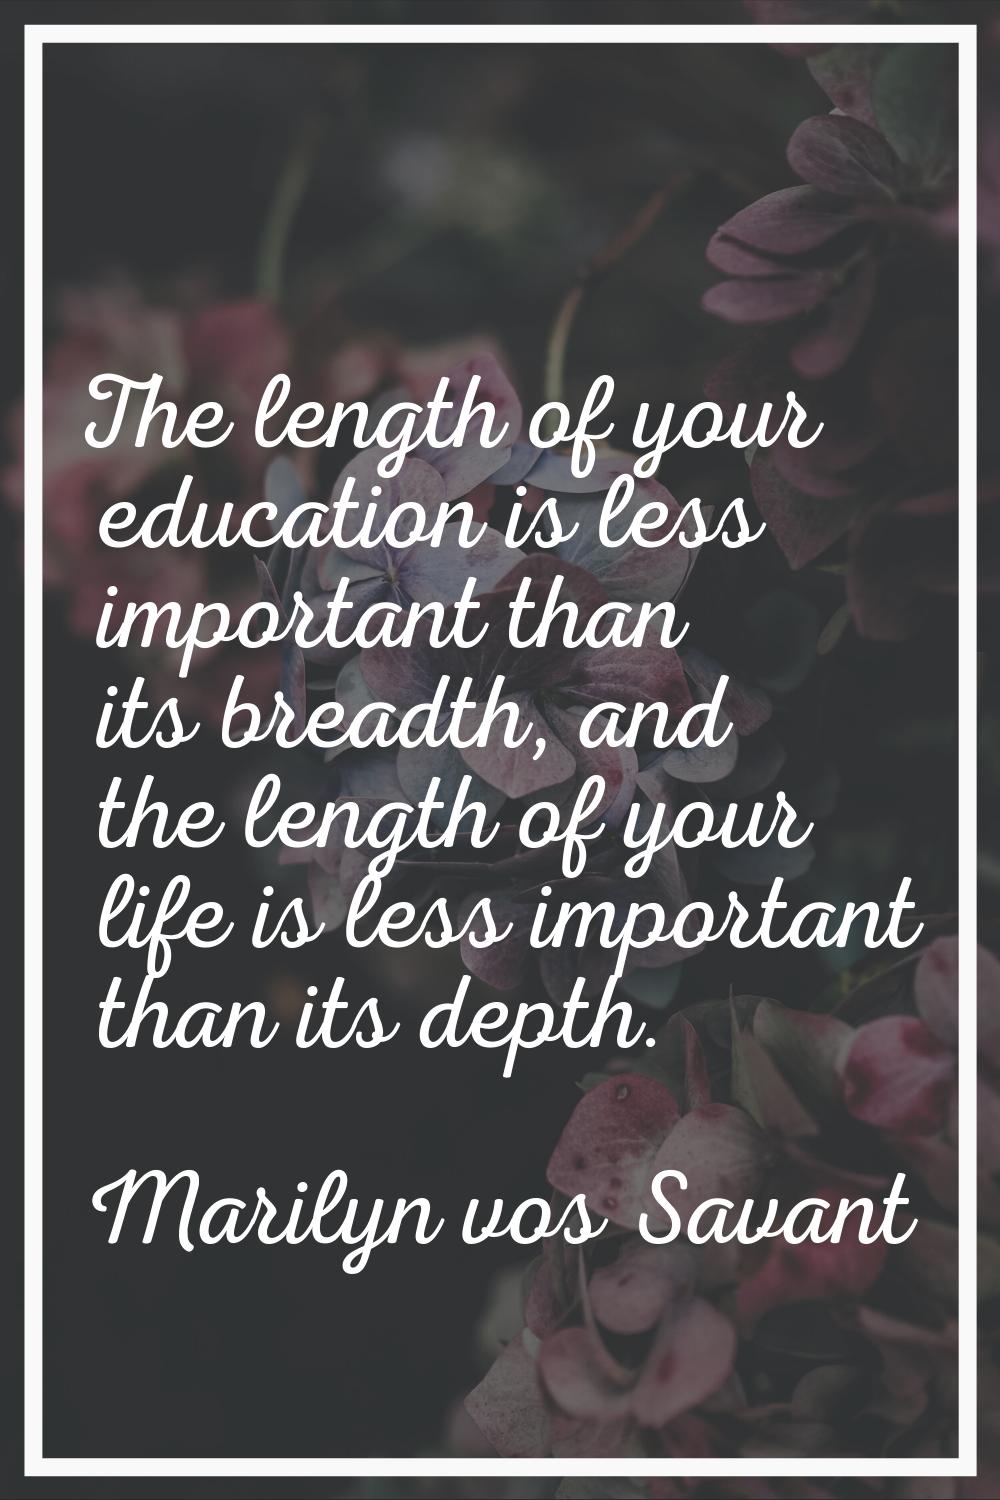 The length of your education is less important than its breadth, and the length of your life is les